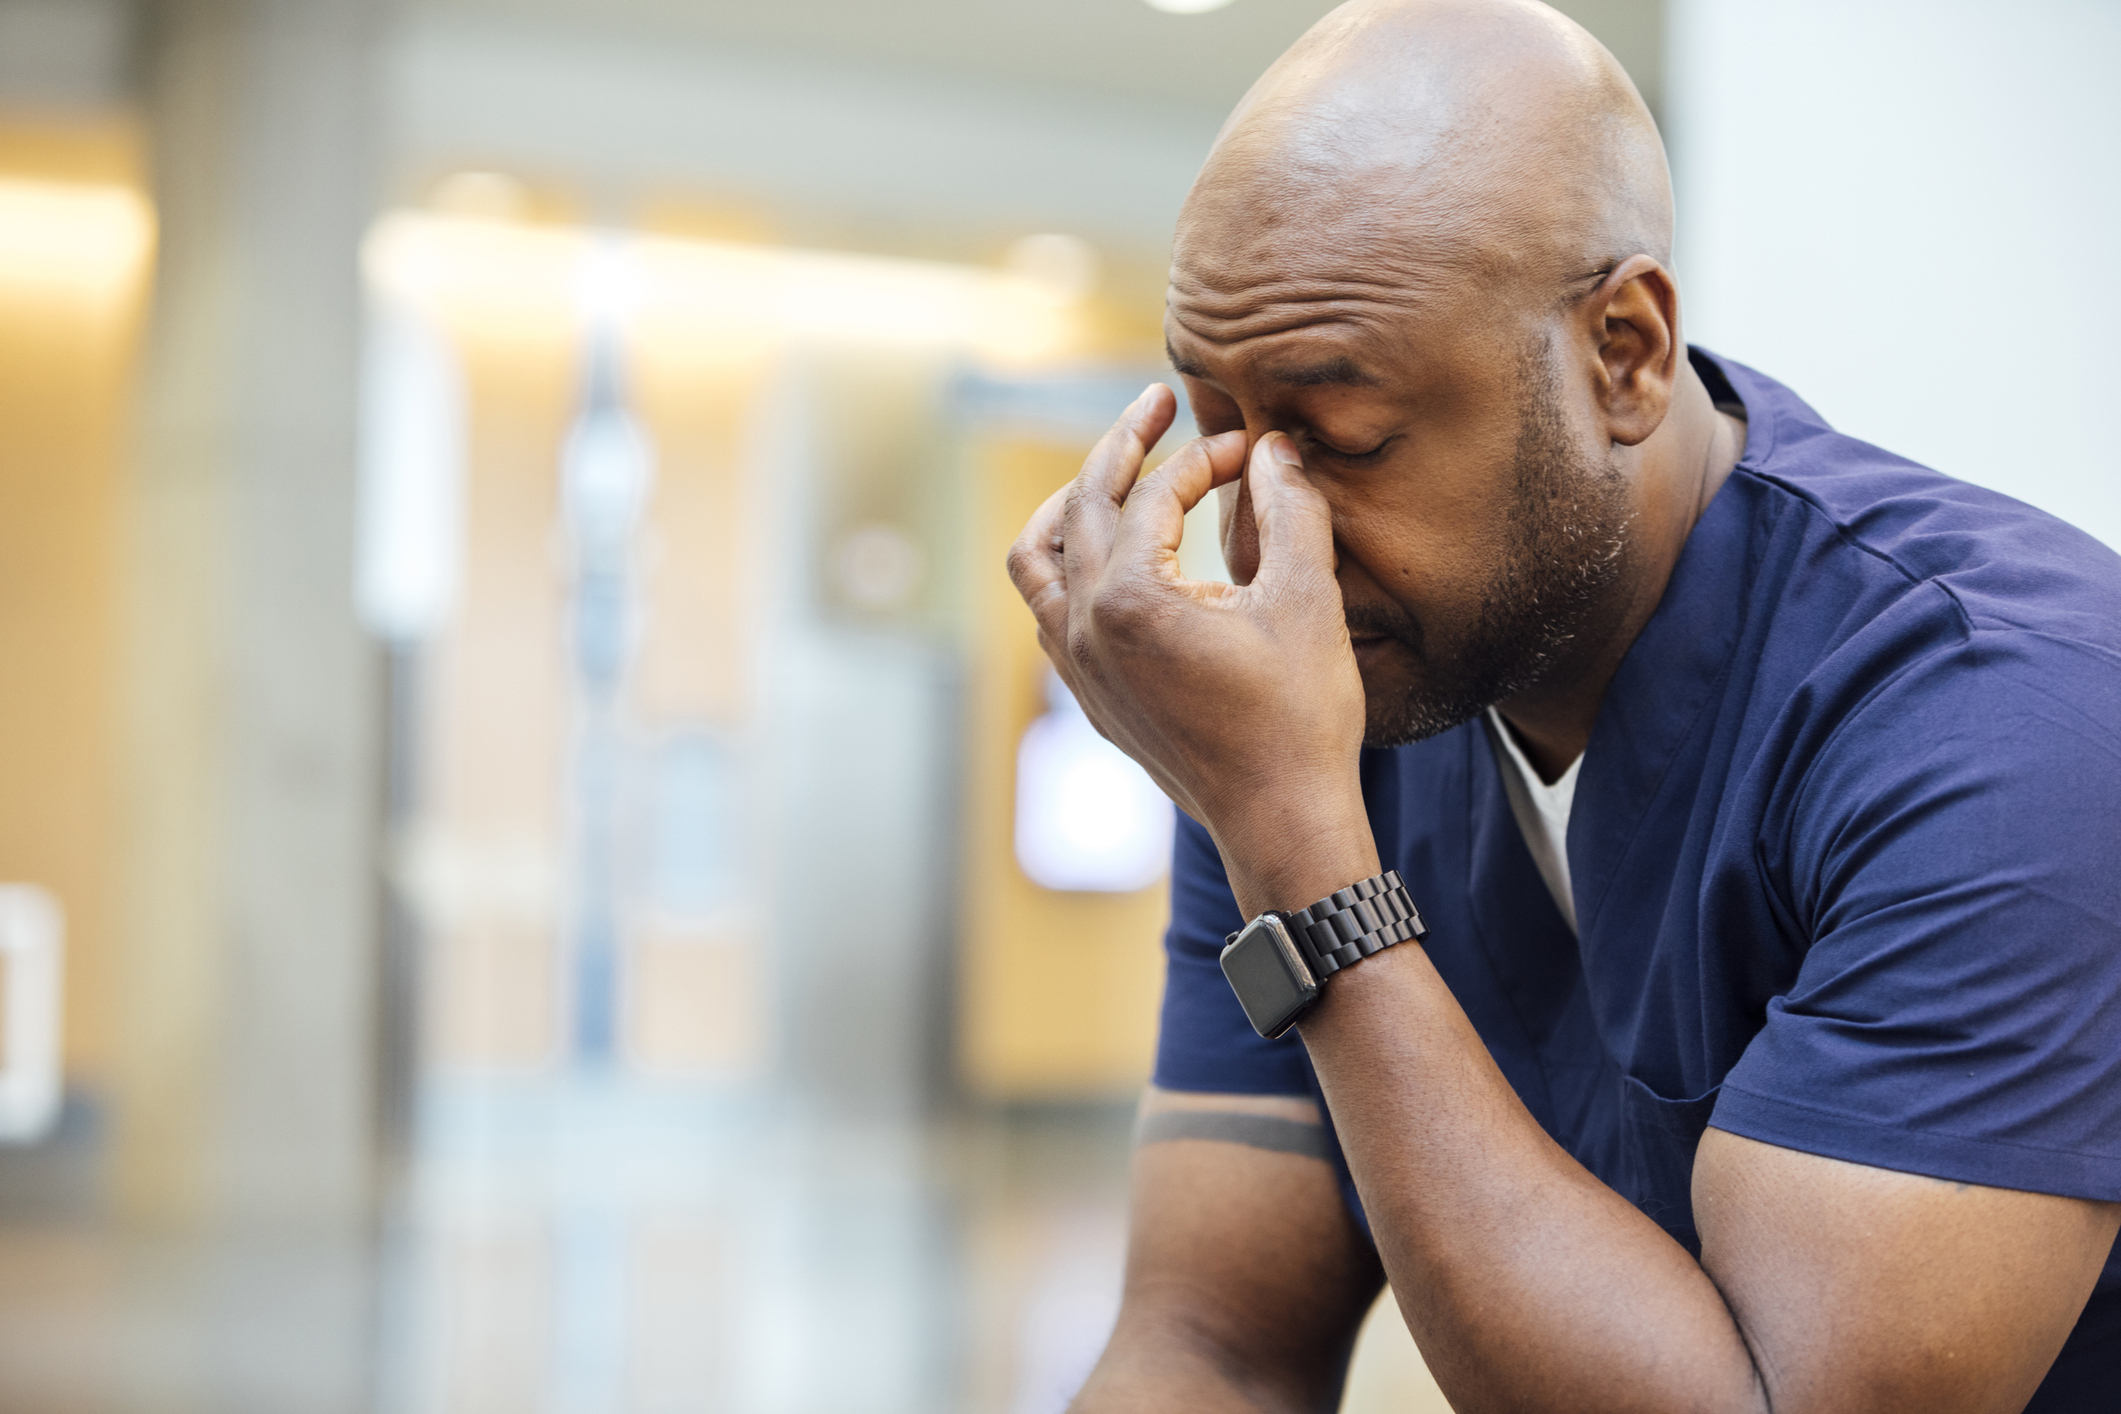 A nurse looking exhausted and rubbing his eyes